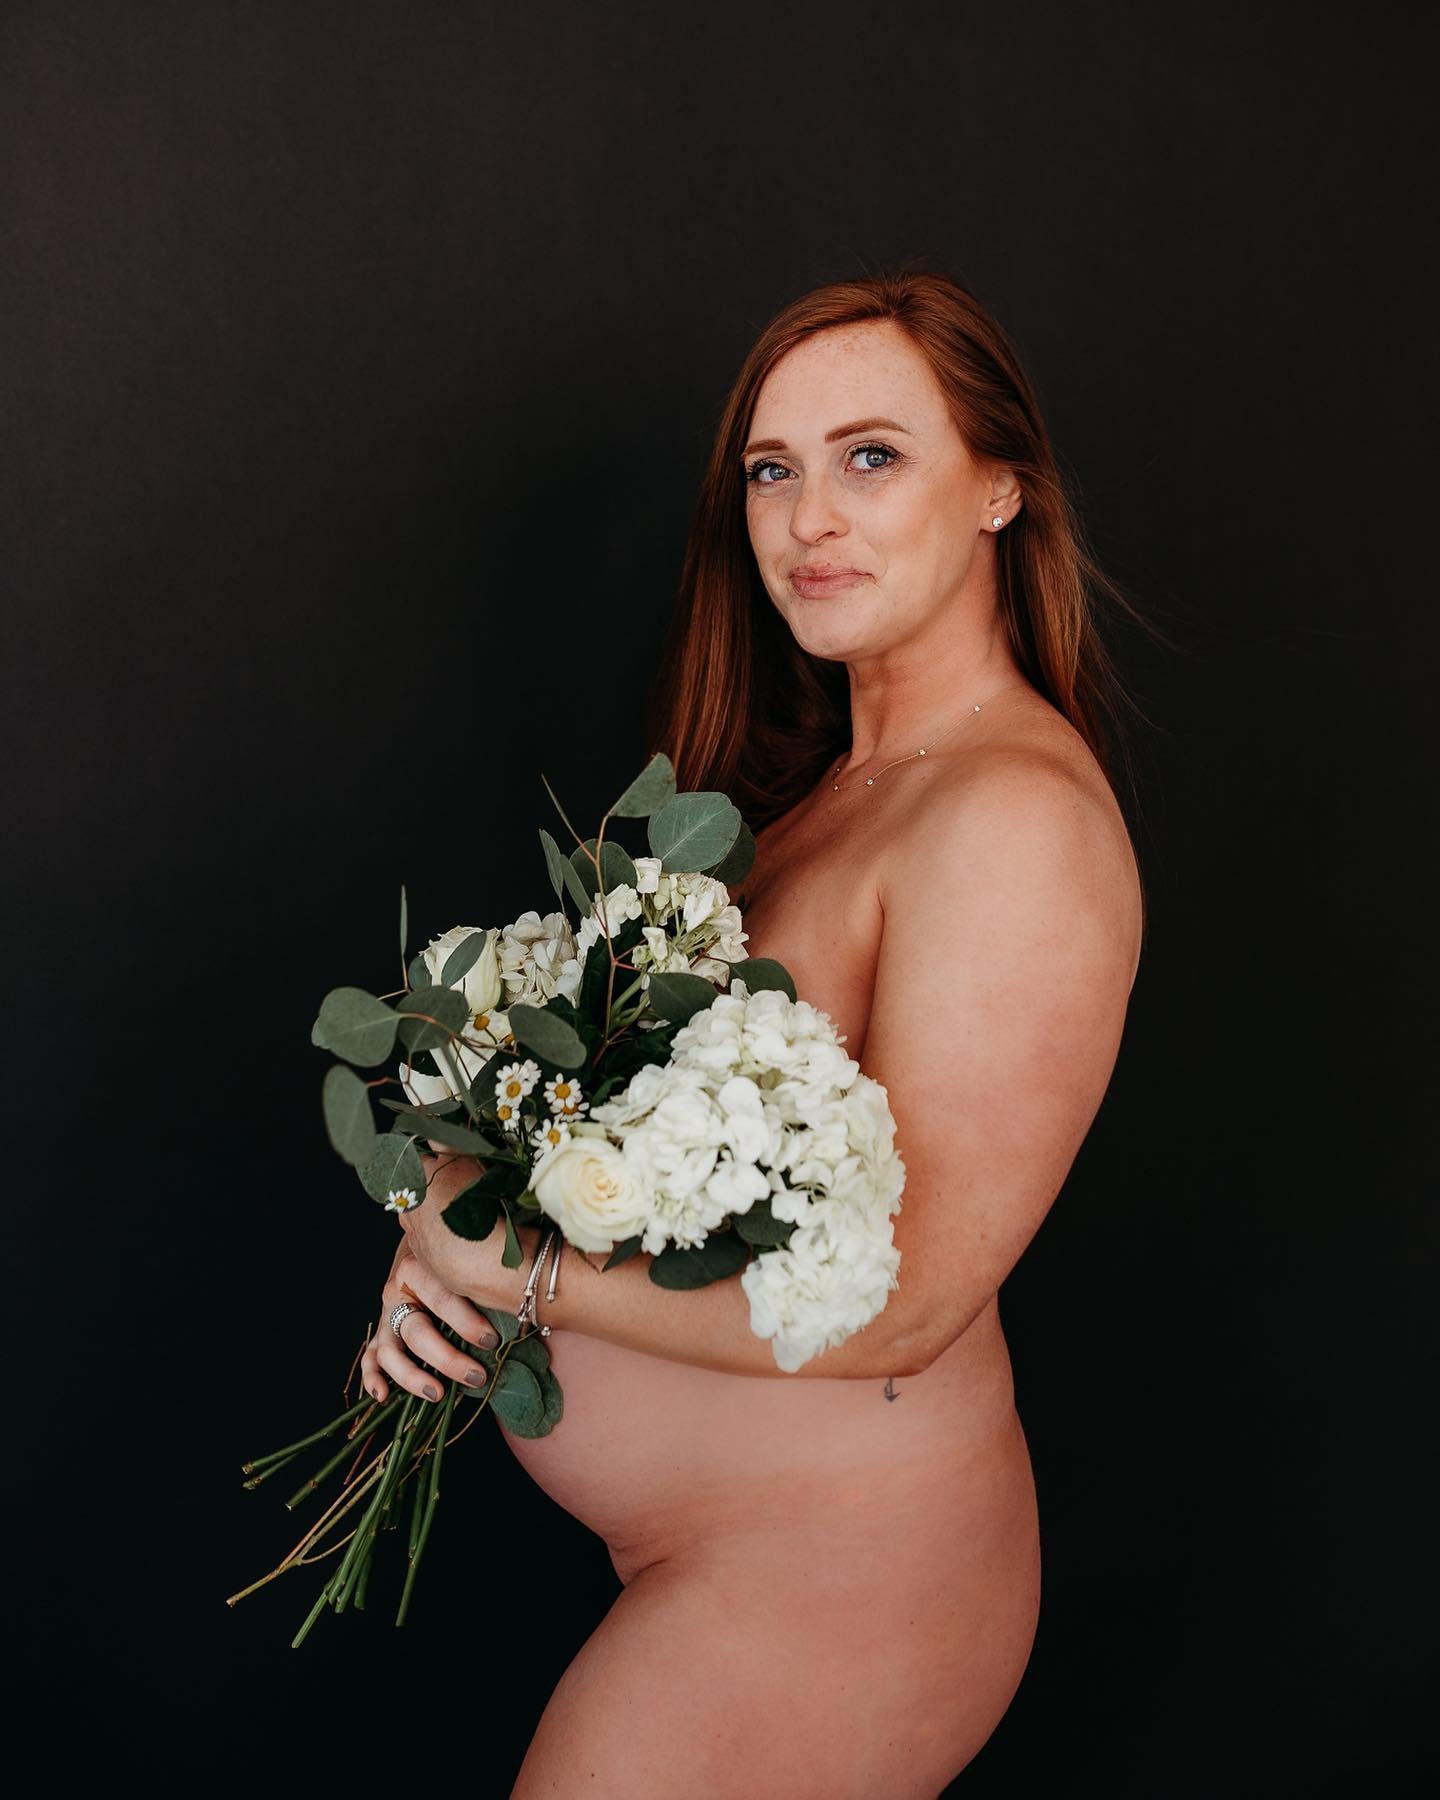 Baby bumps! Ohhh just some of my favorites from Rachel&rsquo;s gallery of sweetness. It is absolutely baby season around here and with the very garbage unpredictable weather (and idk being kind of under the &ldquo;about to pop&rdquo; gun) having a st